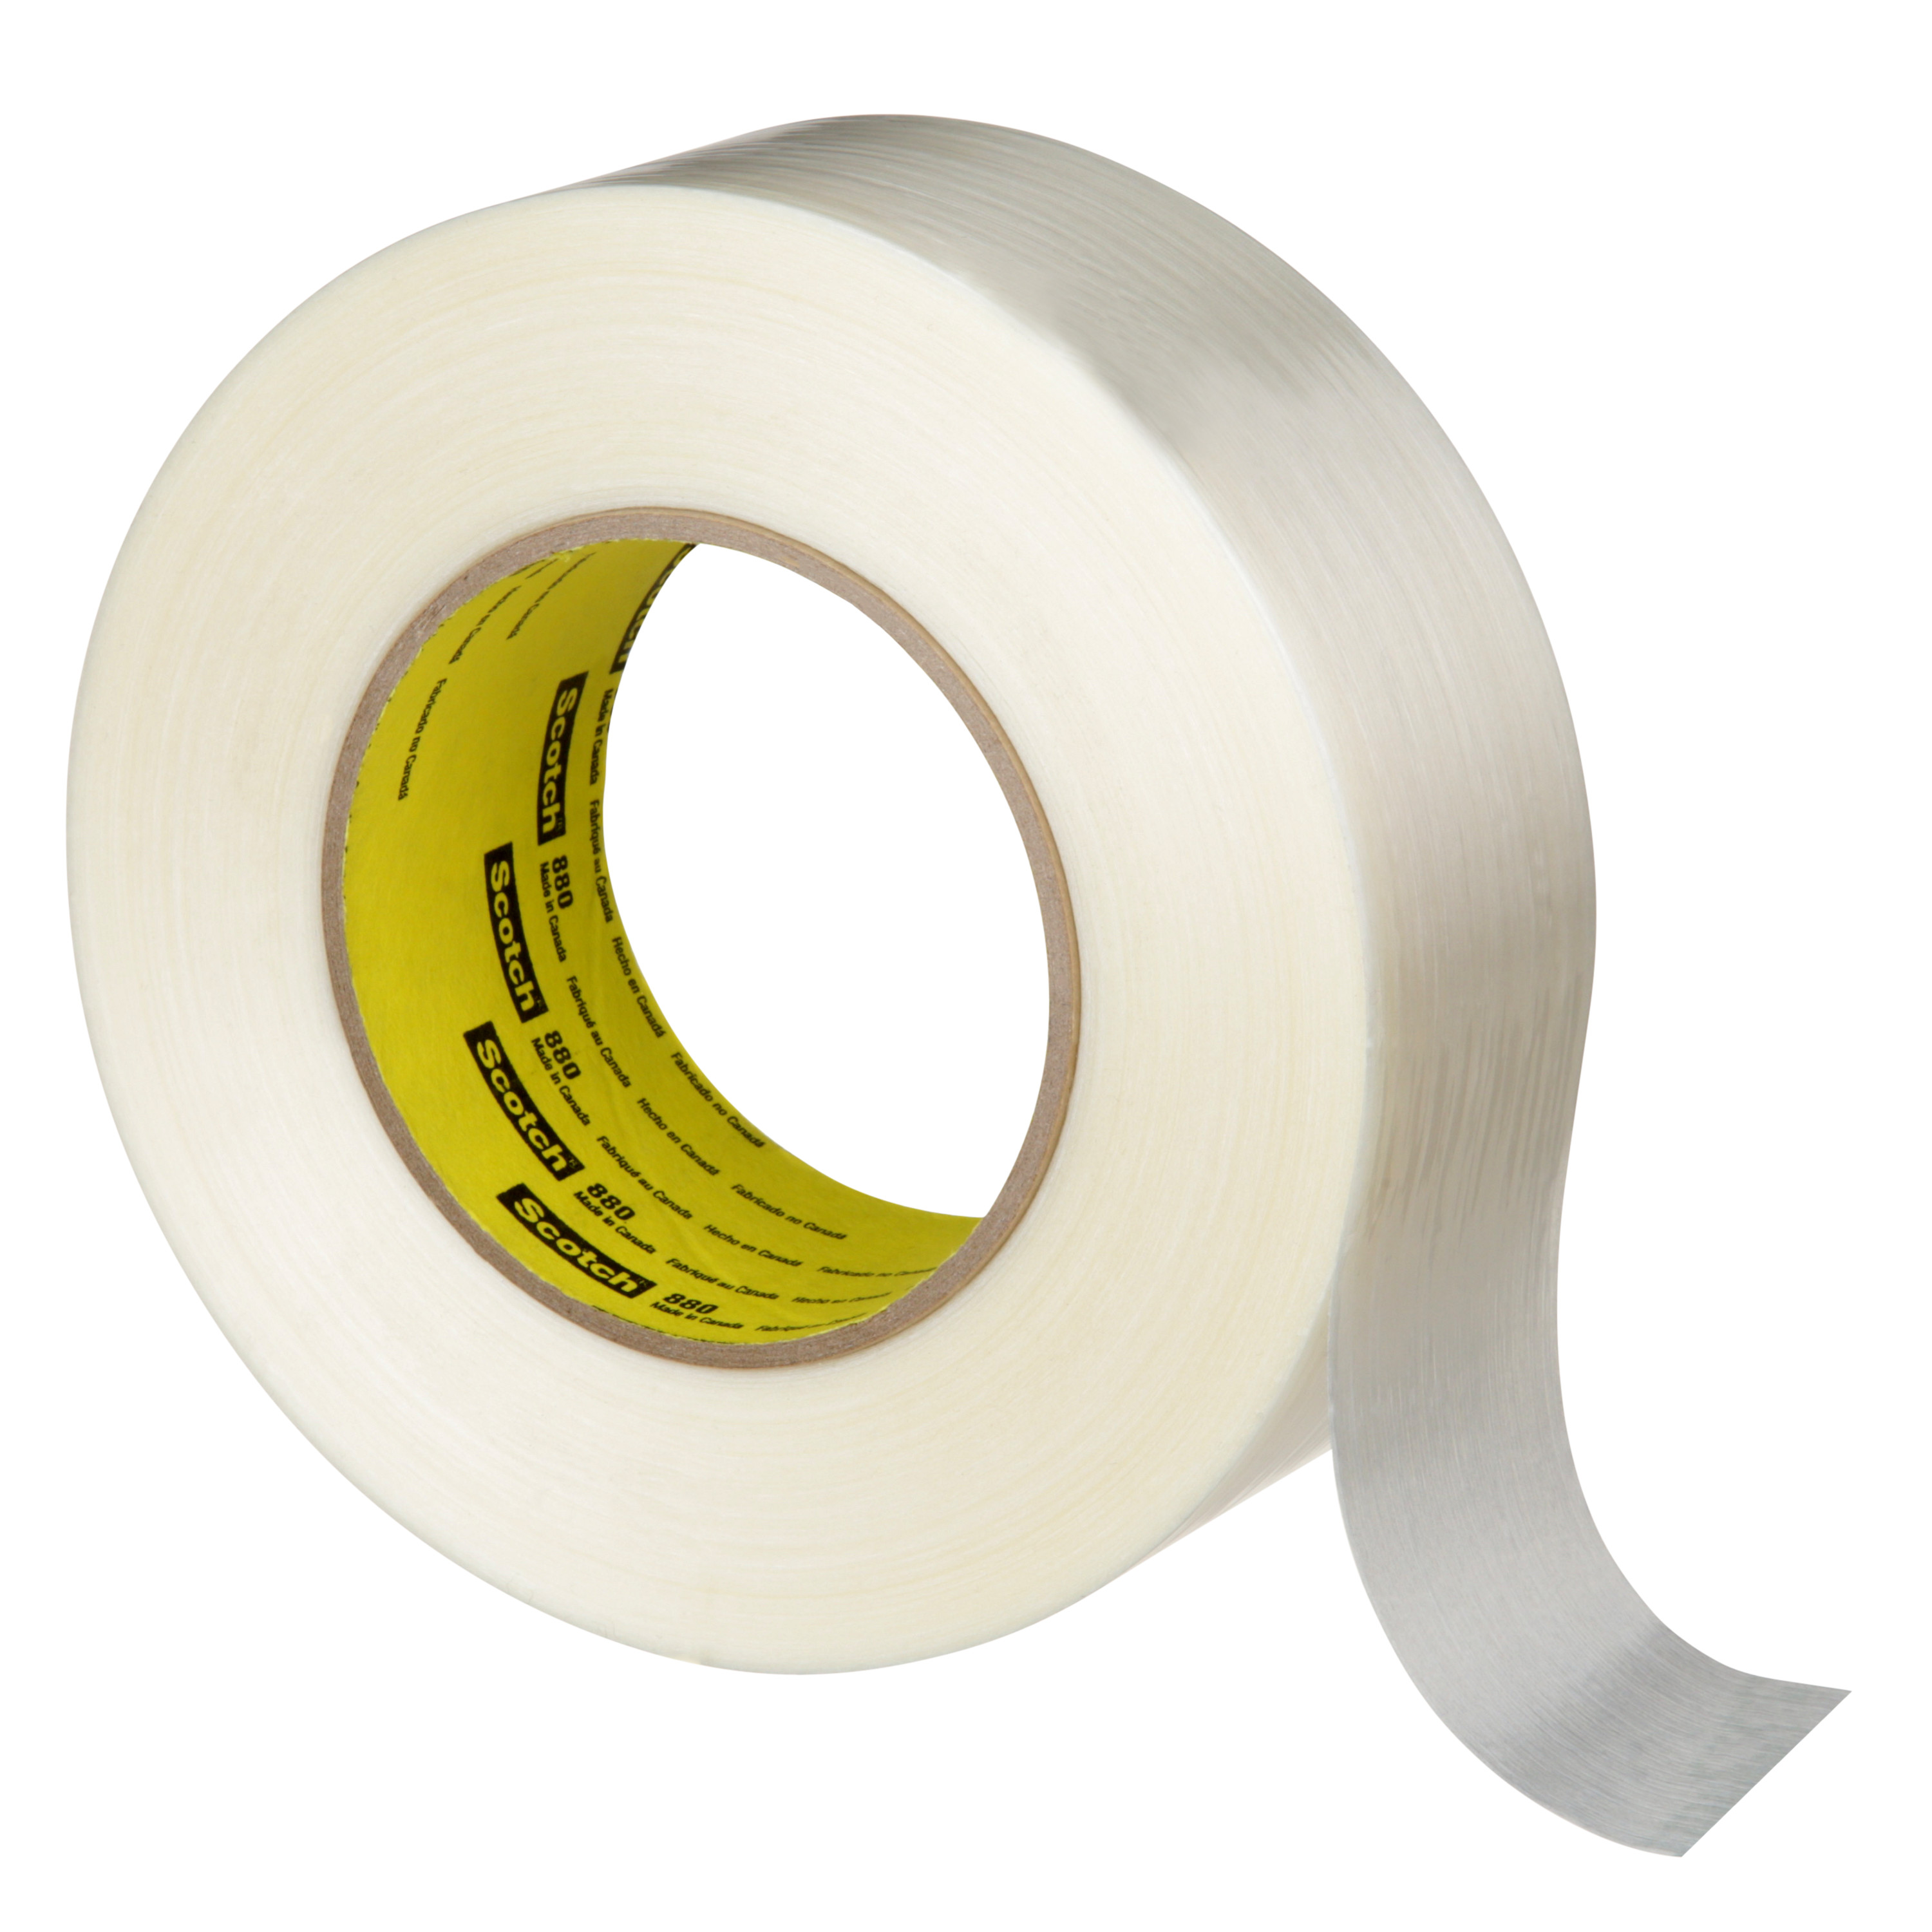 Product Number 880 | Scotch® Filament Tape 880